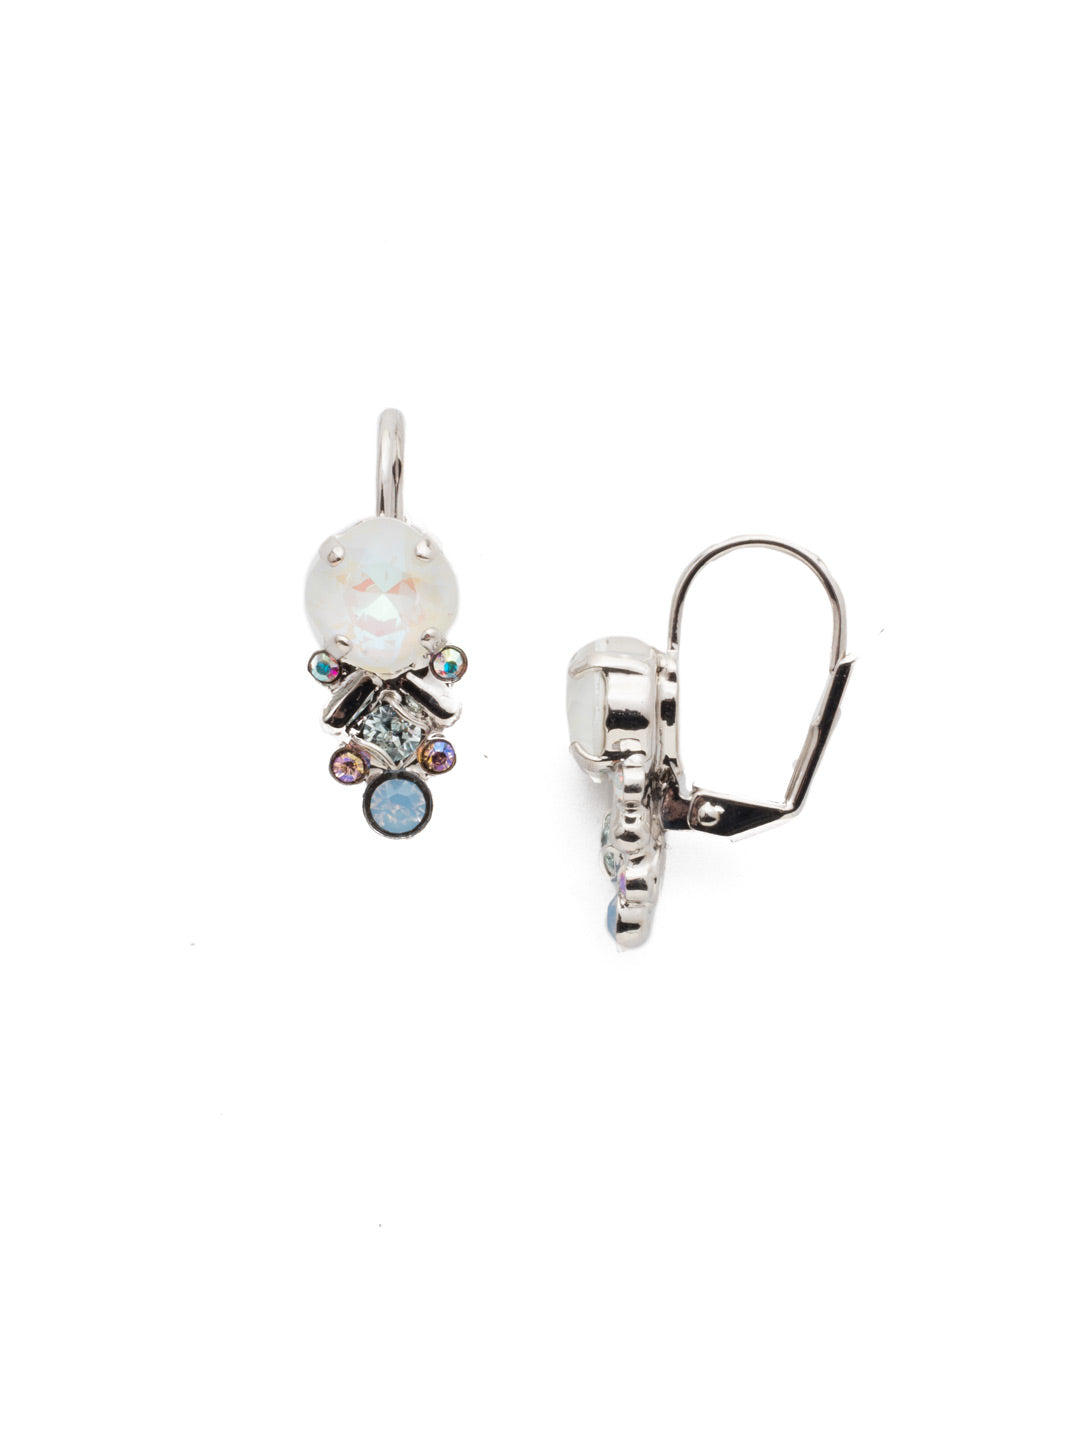 Acacia Dangle Earring - EEK28RHNTB - <p>Simply stunning. These earrings are sure to complement any outfit, wear this cluster of crystals with stunning metalwork. They're a must-have. French wire closure. From Sorrelli's Nantucket Blue collection in our Palladium Silver-tone finish.</p>